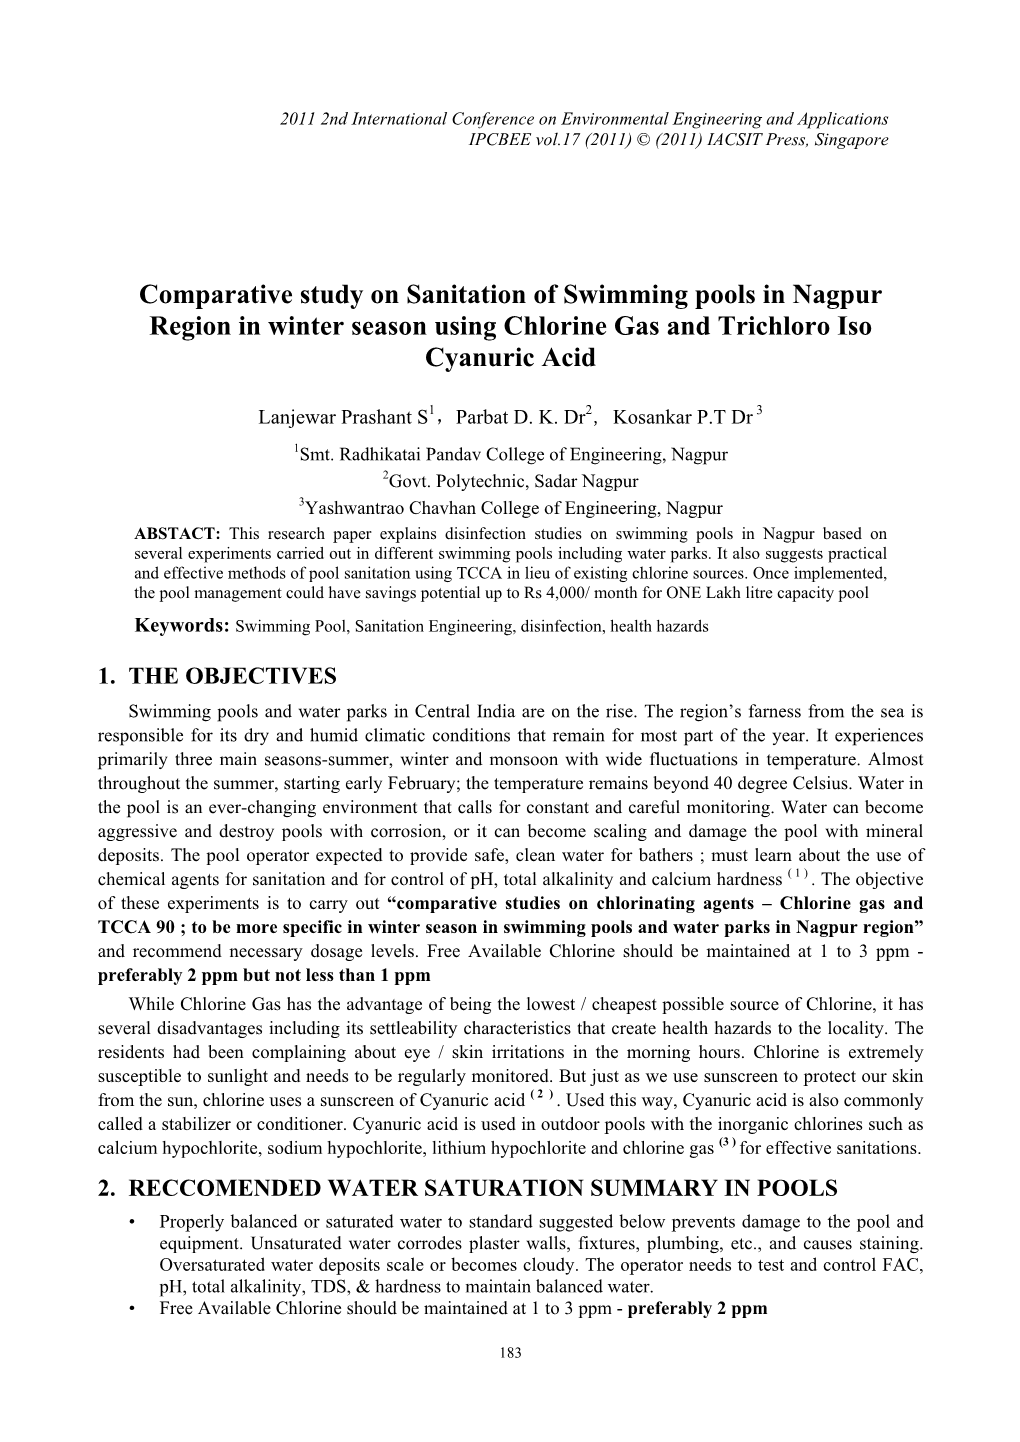 Comparative Study on Sanitation of Swimming Pools in Nagpur Region in Winter Season Using Chlorine Gas and Trichloro Iso Cyanuric Acid